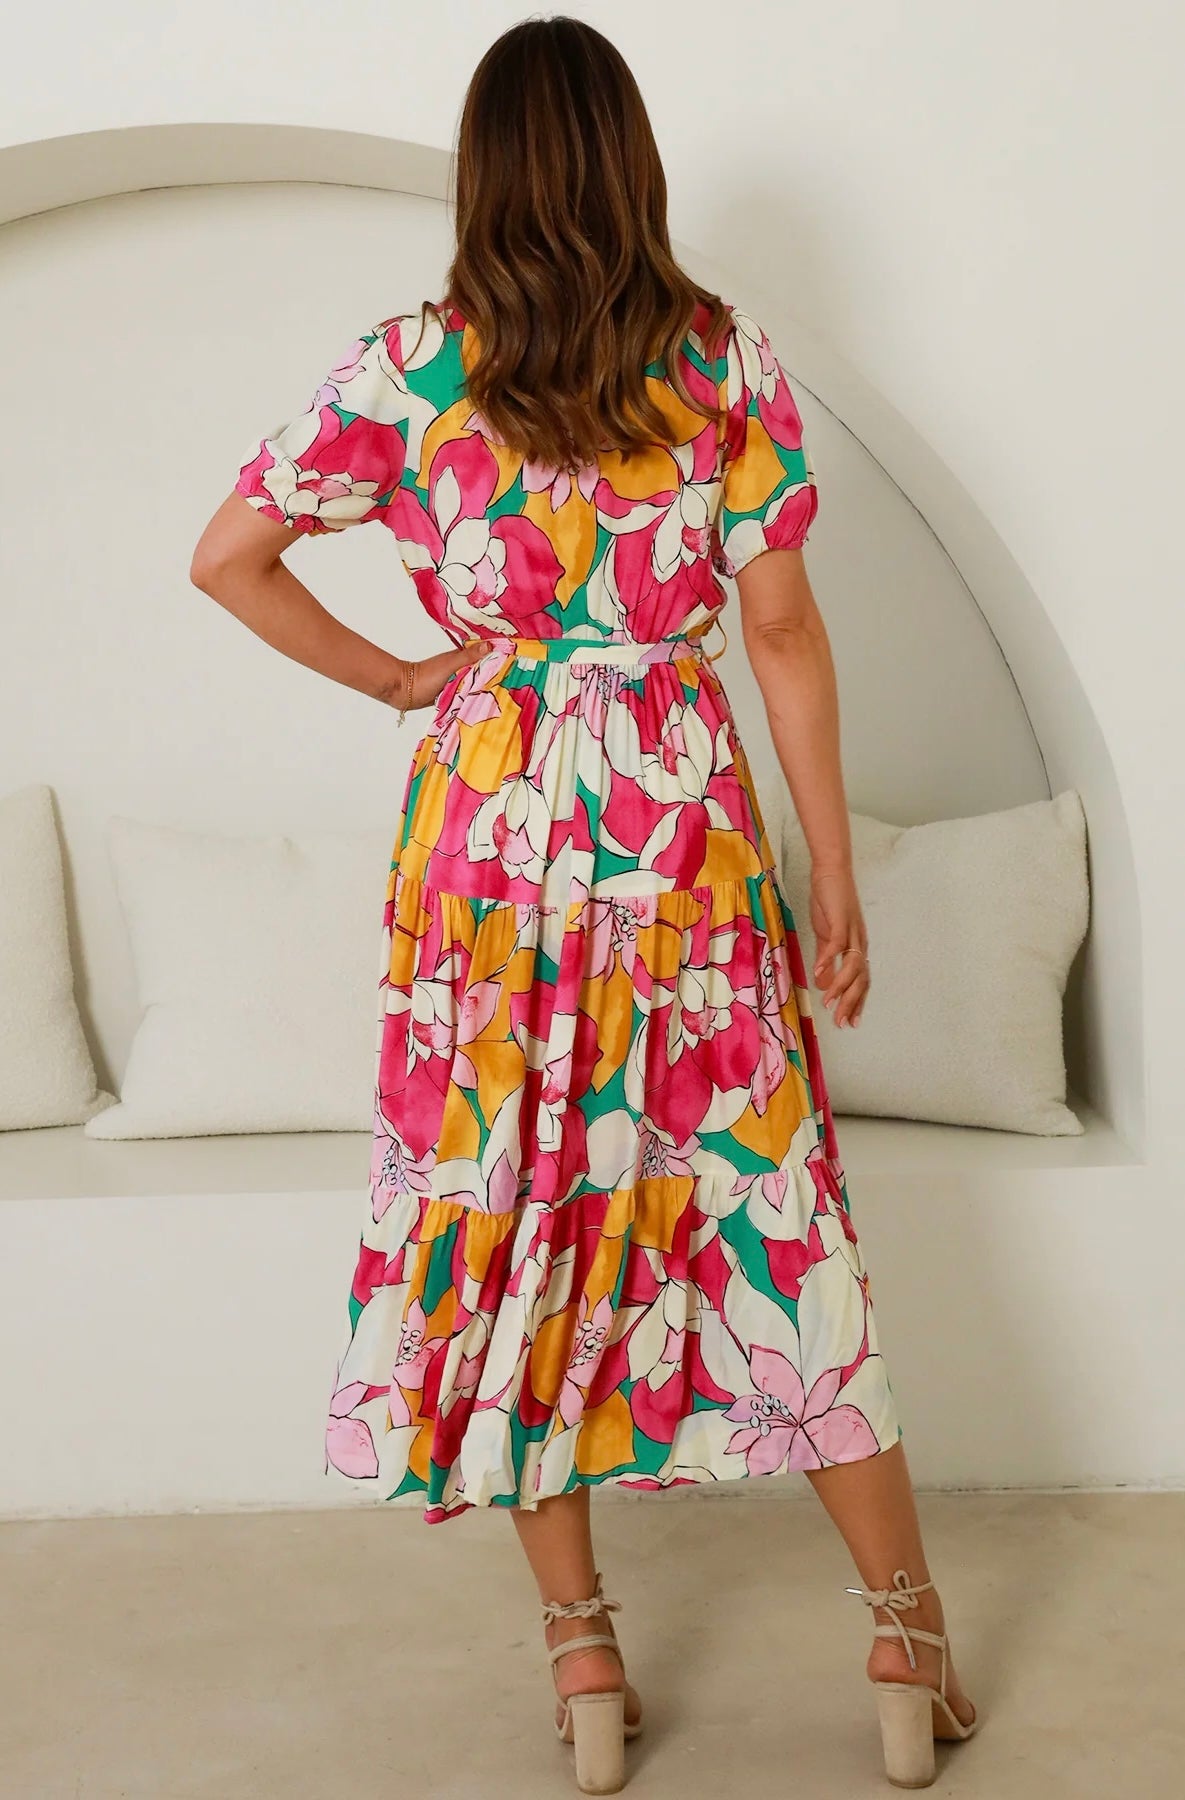 ***NEW*** Tallulah Midi Dress: Tallulah brings vibrant pinks, yellows and greens together in a vibrant floral print and super cute shape. It has a tiered midi skirt, crossover bust and elasticated - Ciao Bella Dresses 